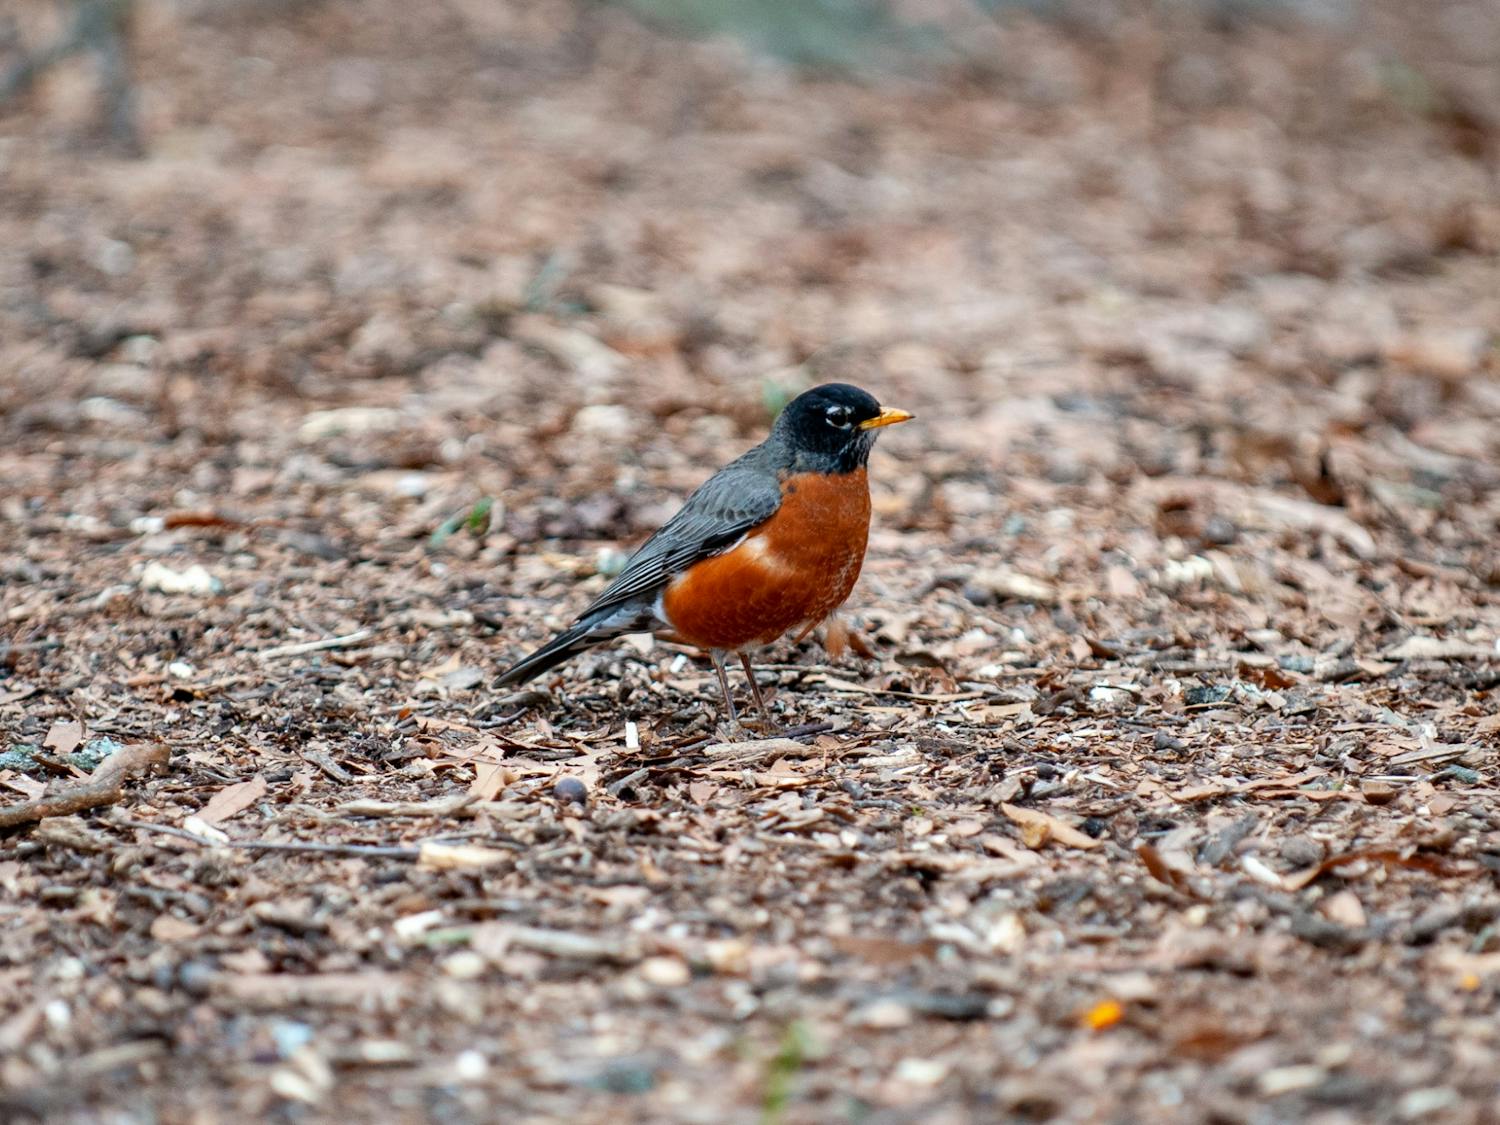 The Carolina campus is home to several animals including birds, squirrels and cats.